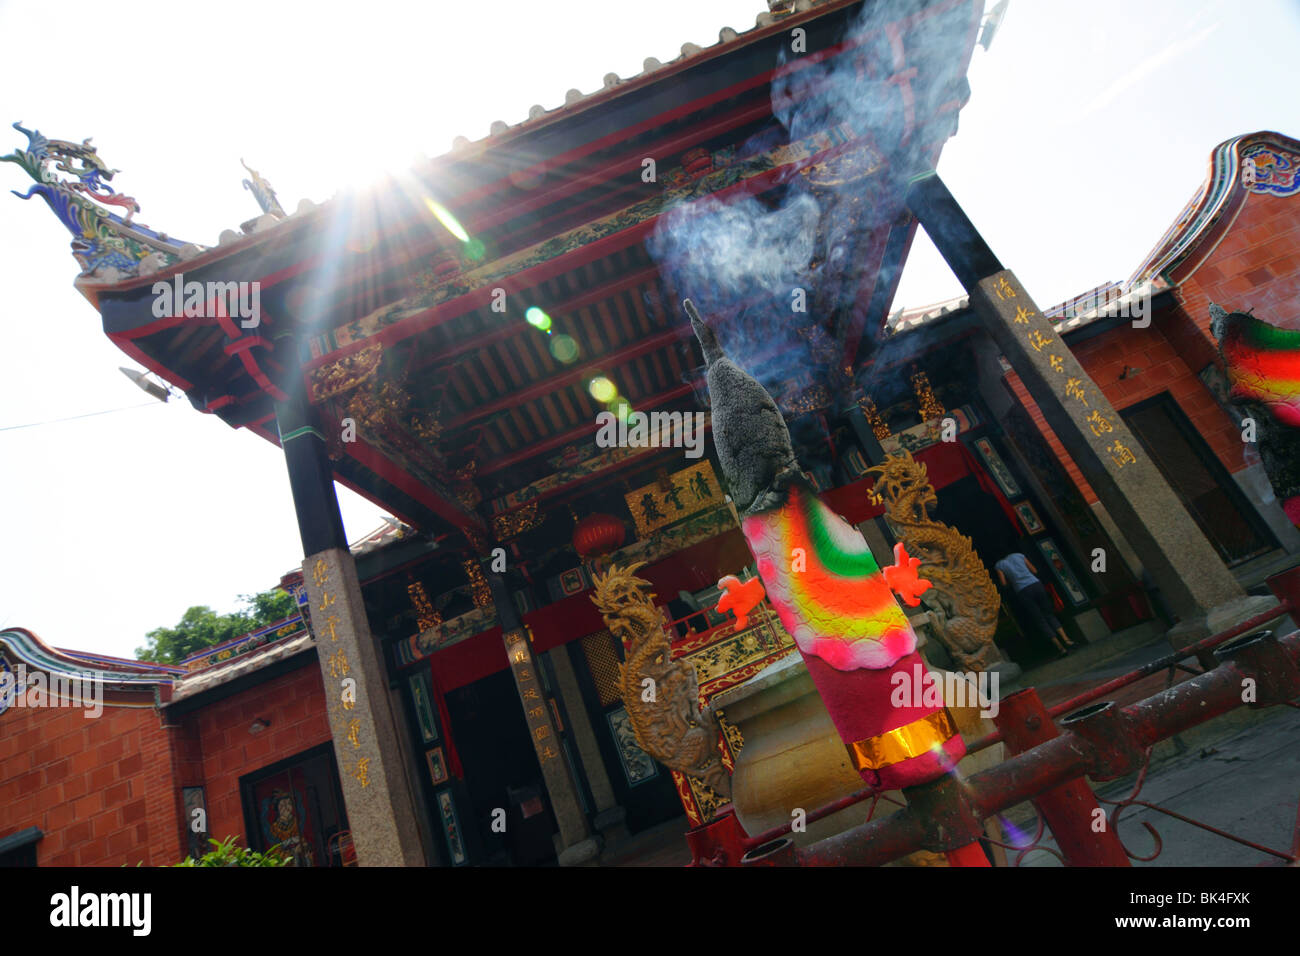 A big stick of incense burning in front of the Snake Temple in Penang, Malaysia Stock Photo